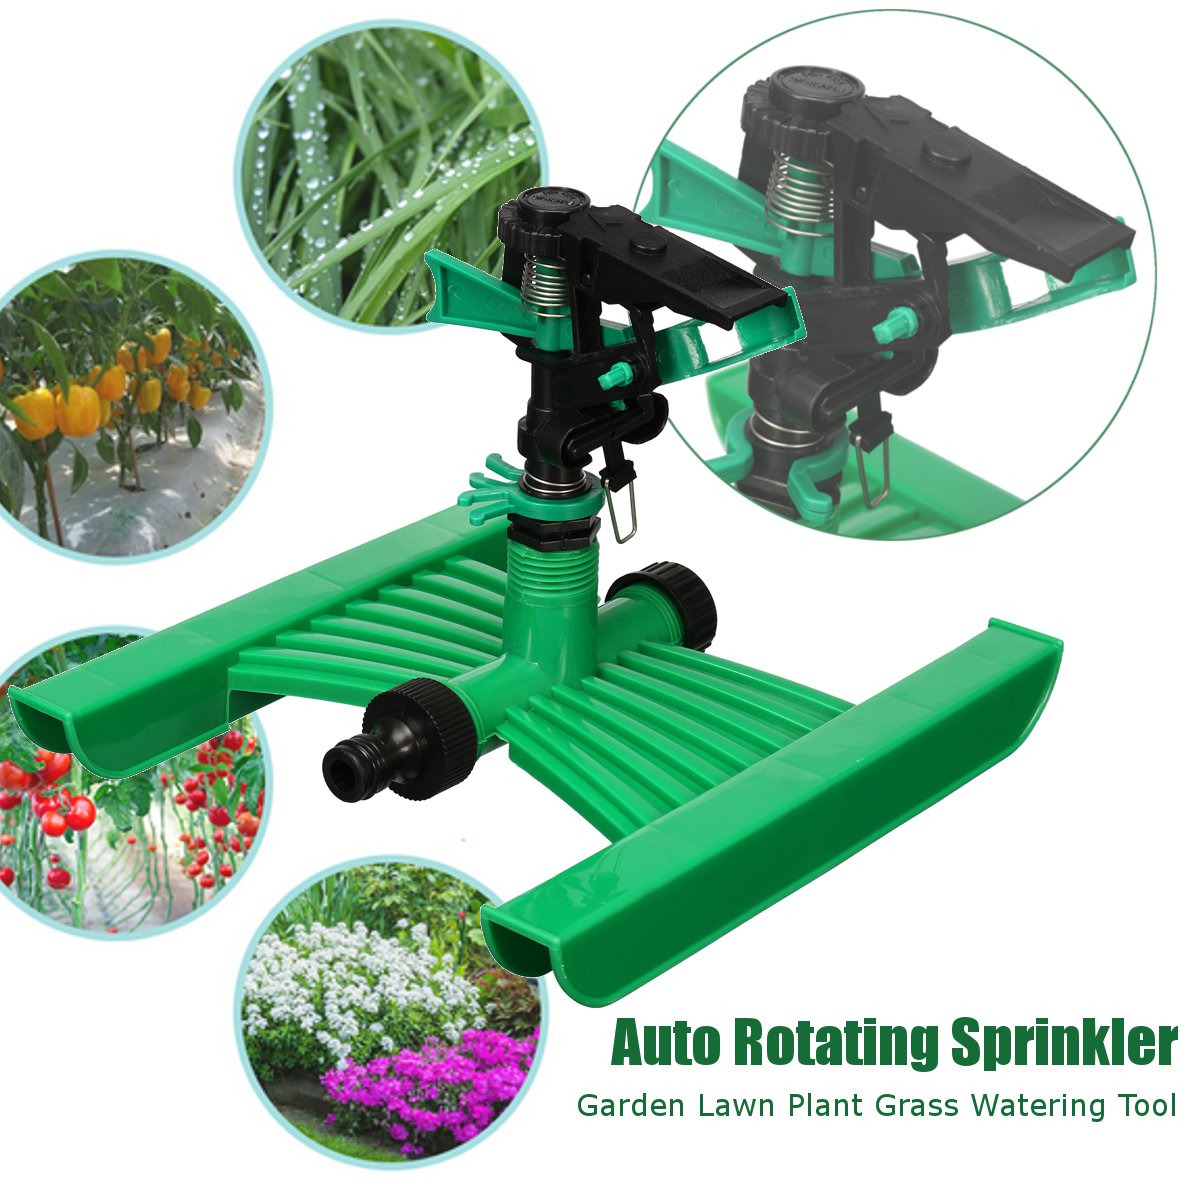 H-Base-Plastic-Auto-Rotating-Lawn-Sprinkler-Garden-Lawn-Plant-Grass-Watering-Tool-1558817-10